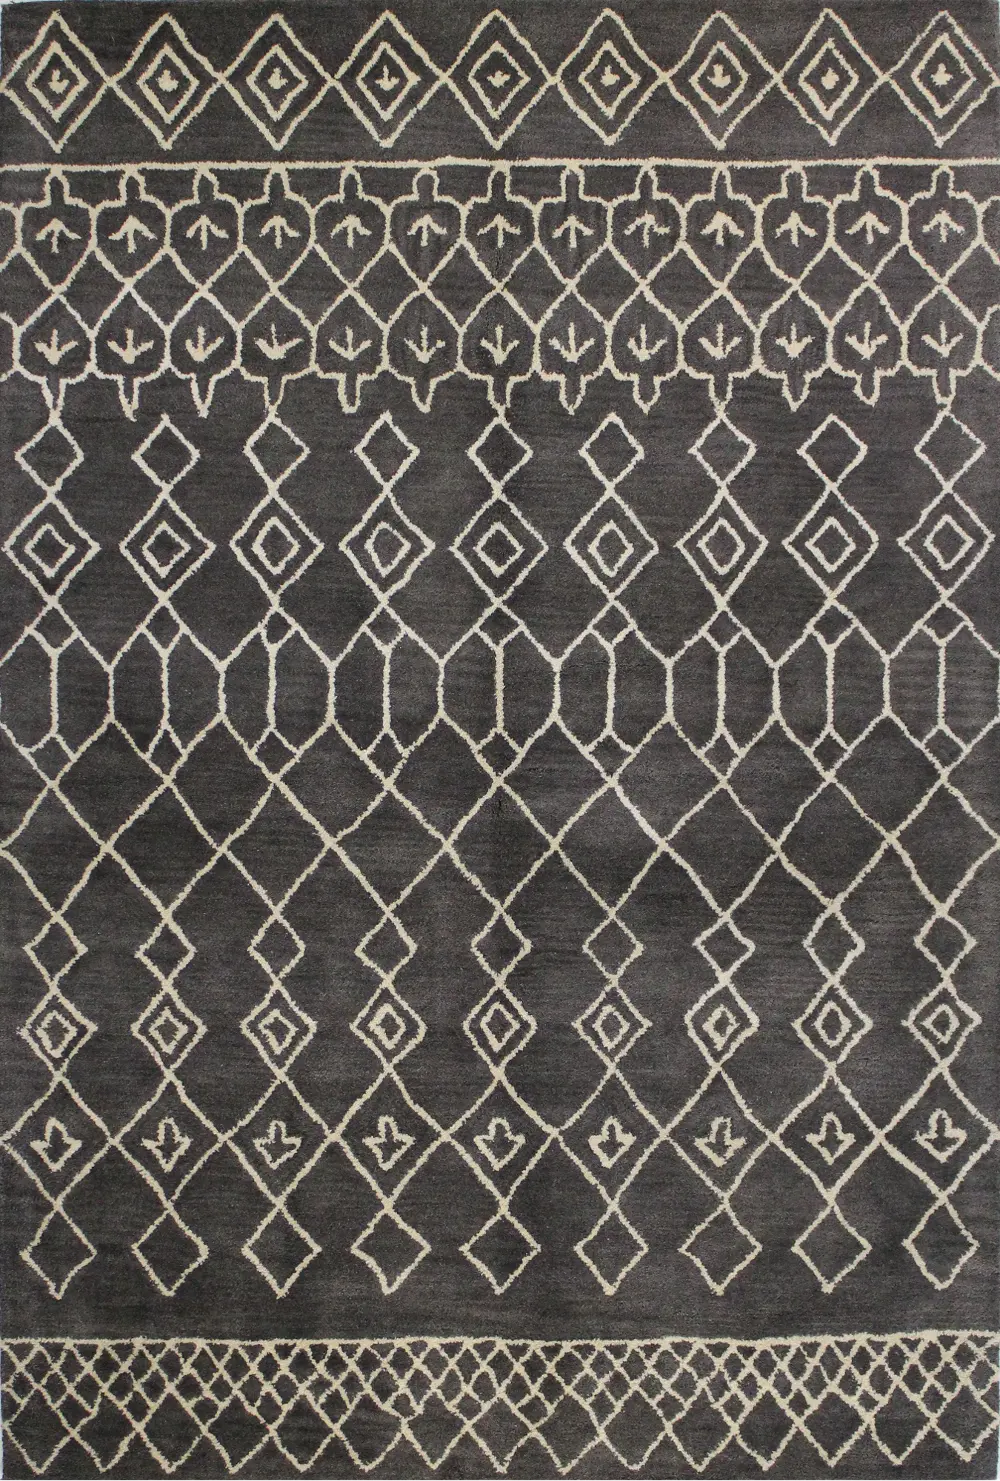 S185-CHAR-9X12-ST258 9 x 12 X-Large Charcoal Gray Area Rug - Chelsea-1